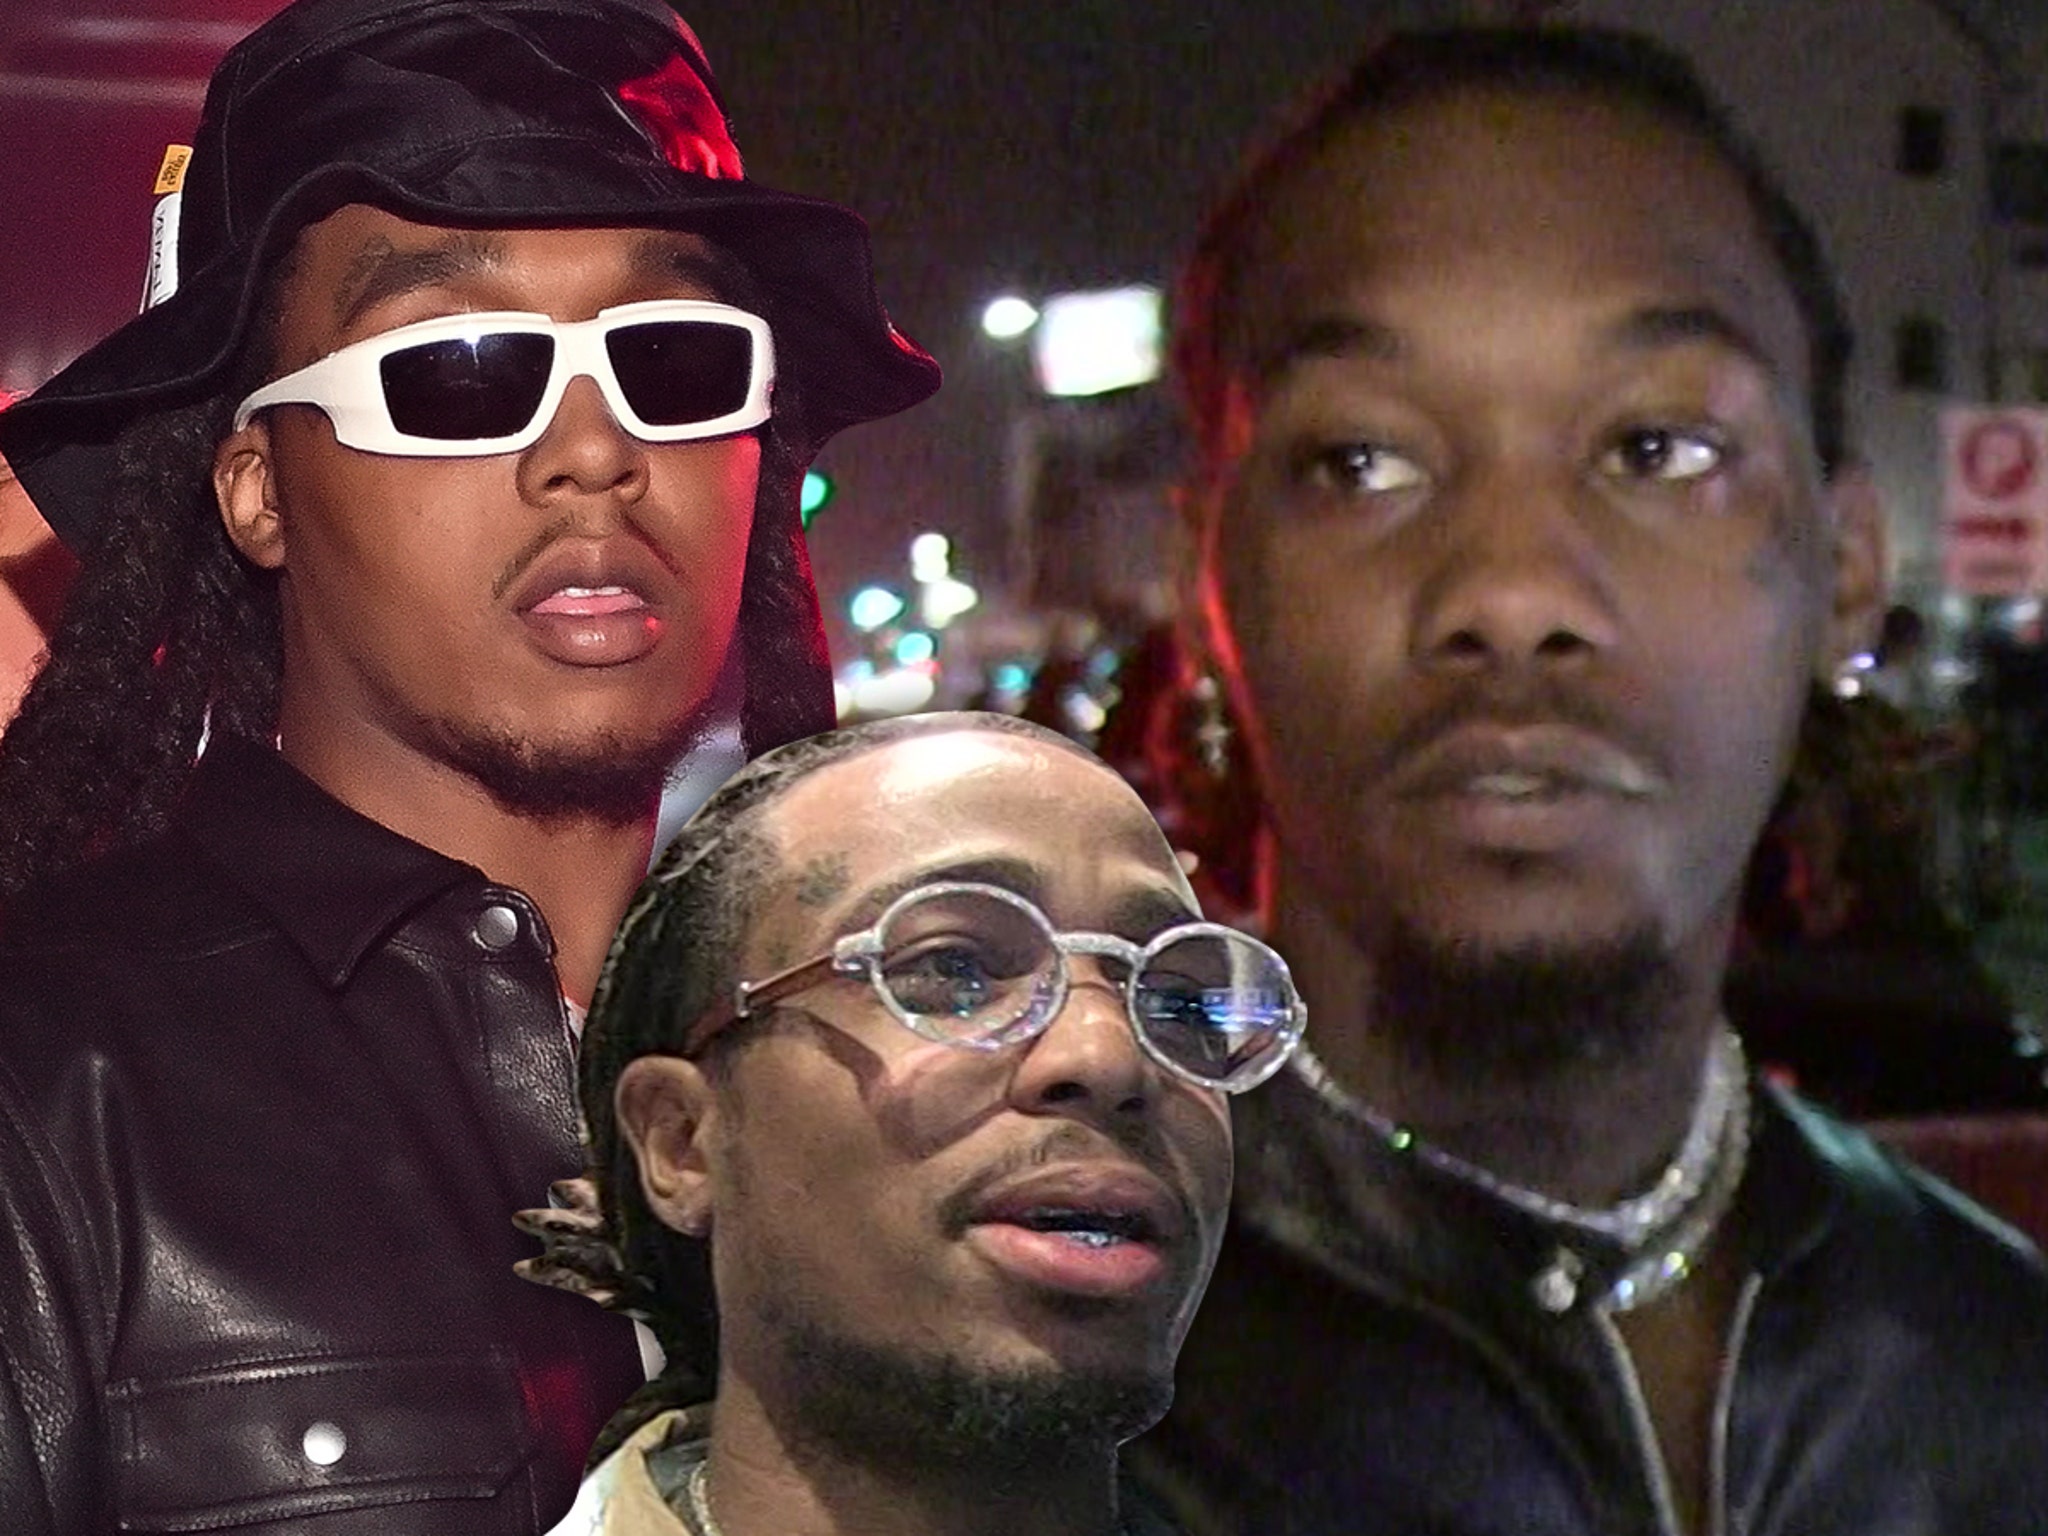 Offset on Takeoff's Death, Migos' Breakup and His New Solo Album